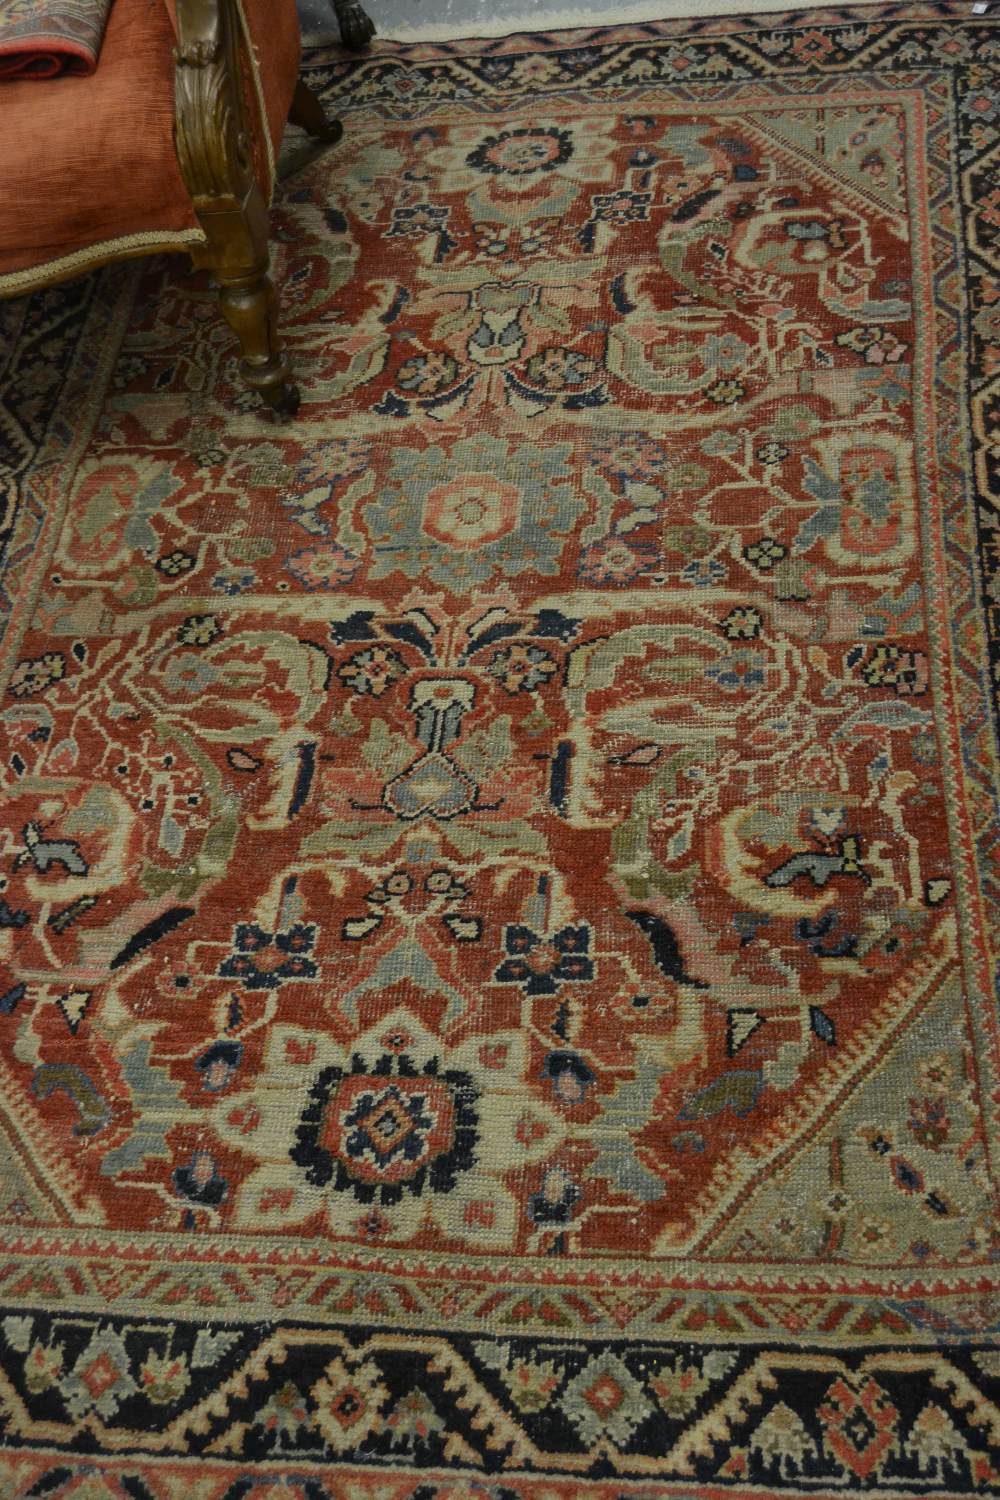 Kurdish rug with an all-over stylised medallion and floral design on a red ground with borders